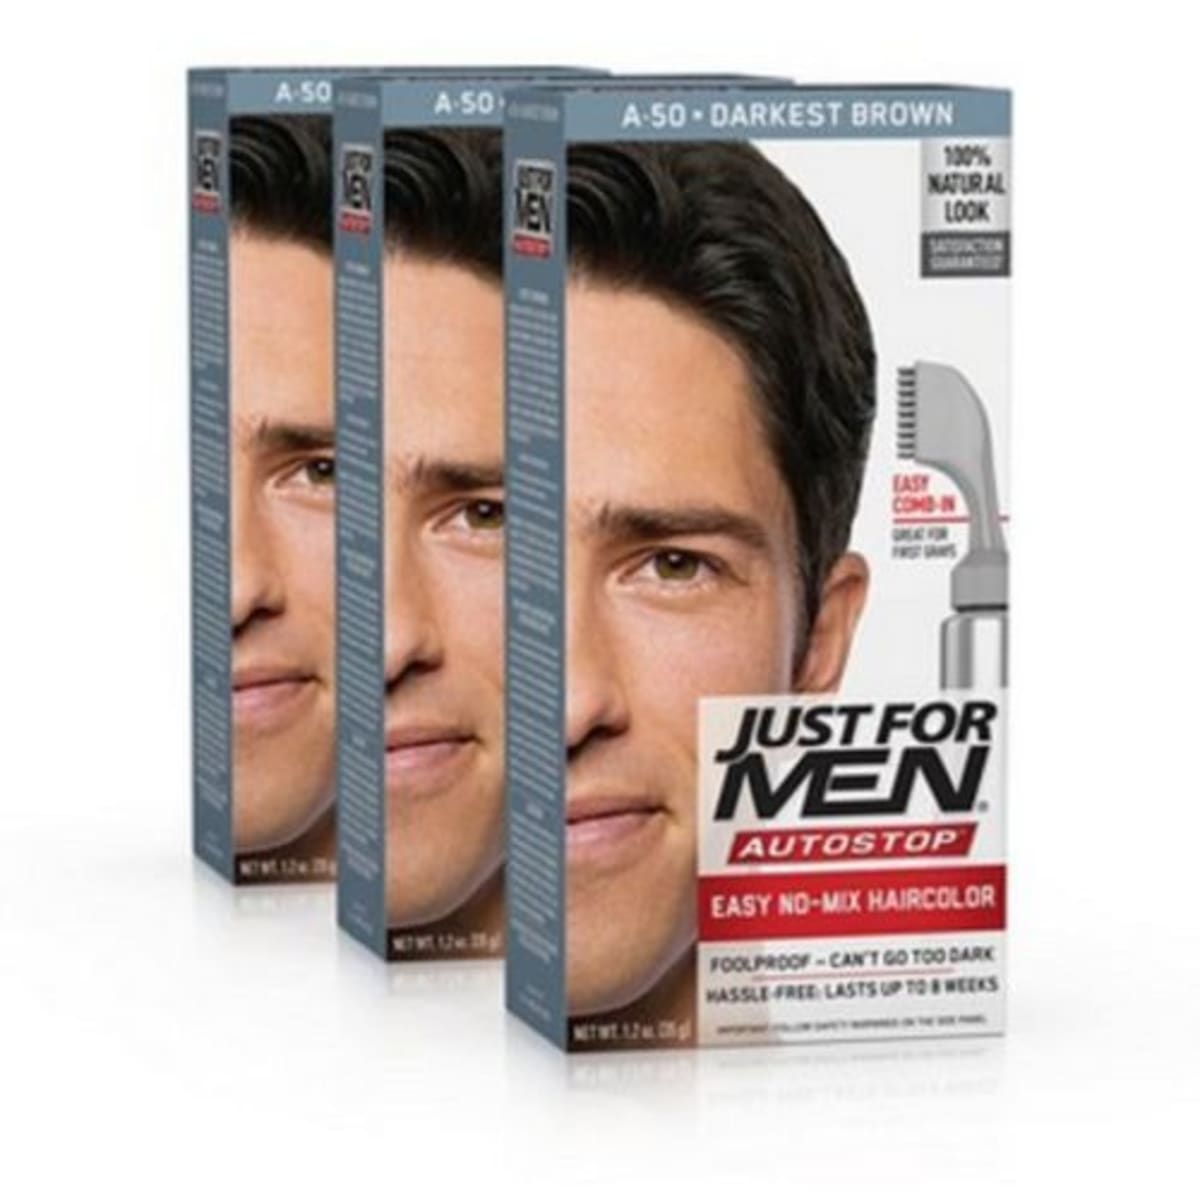 Easy Comb-in Color, Hair Color for Men